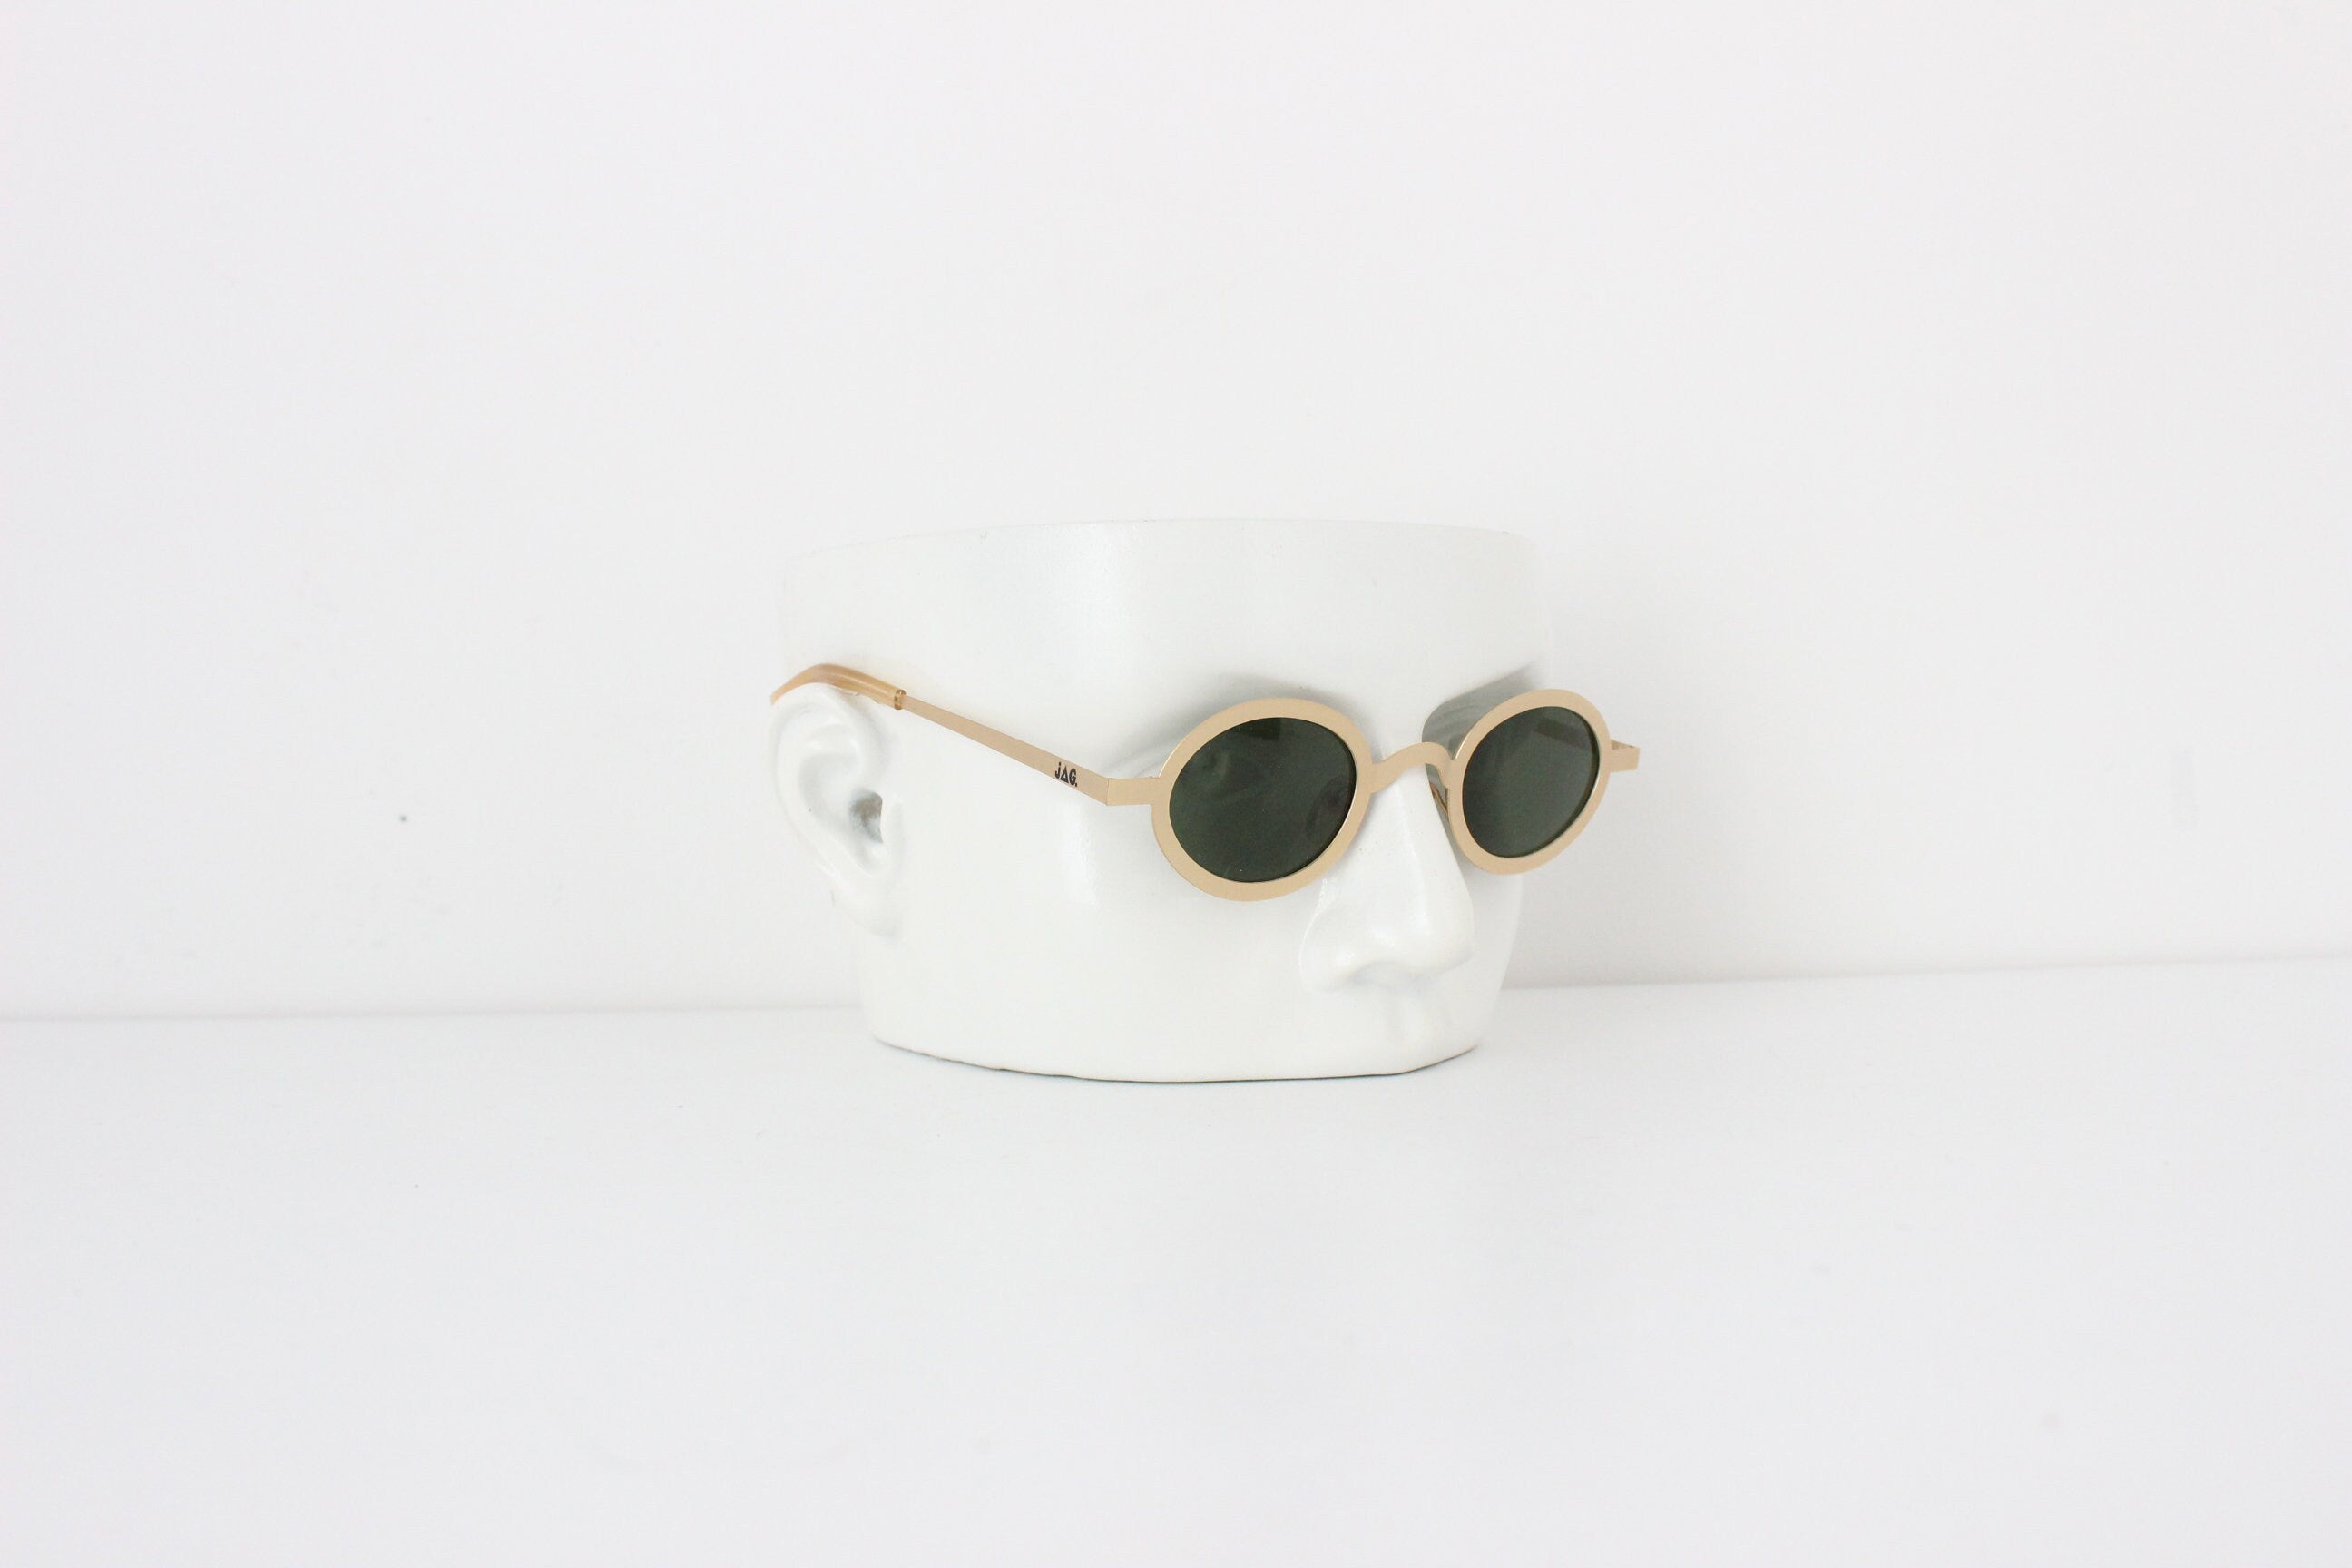 1990s JAG Matte Gold Metal Oval Sunglasses - Made in Italy